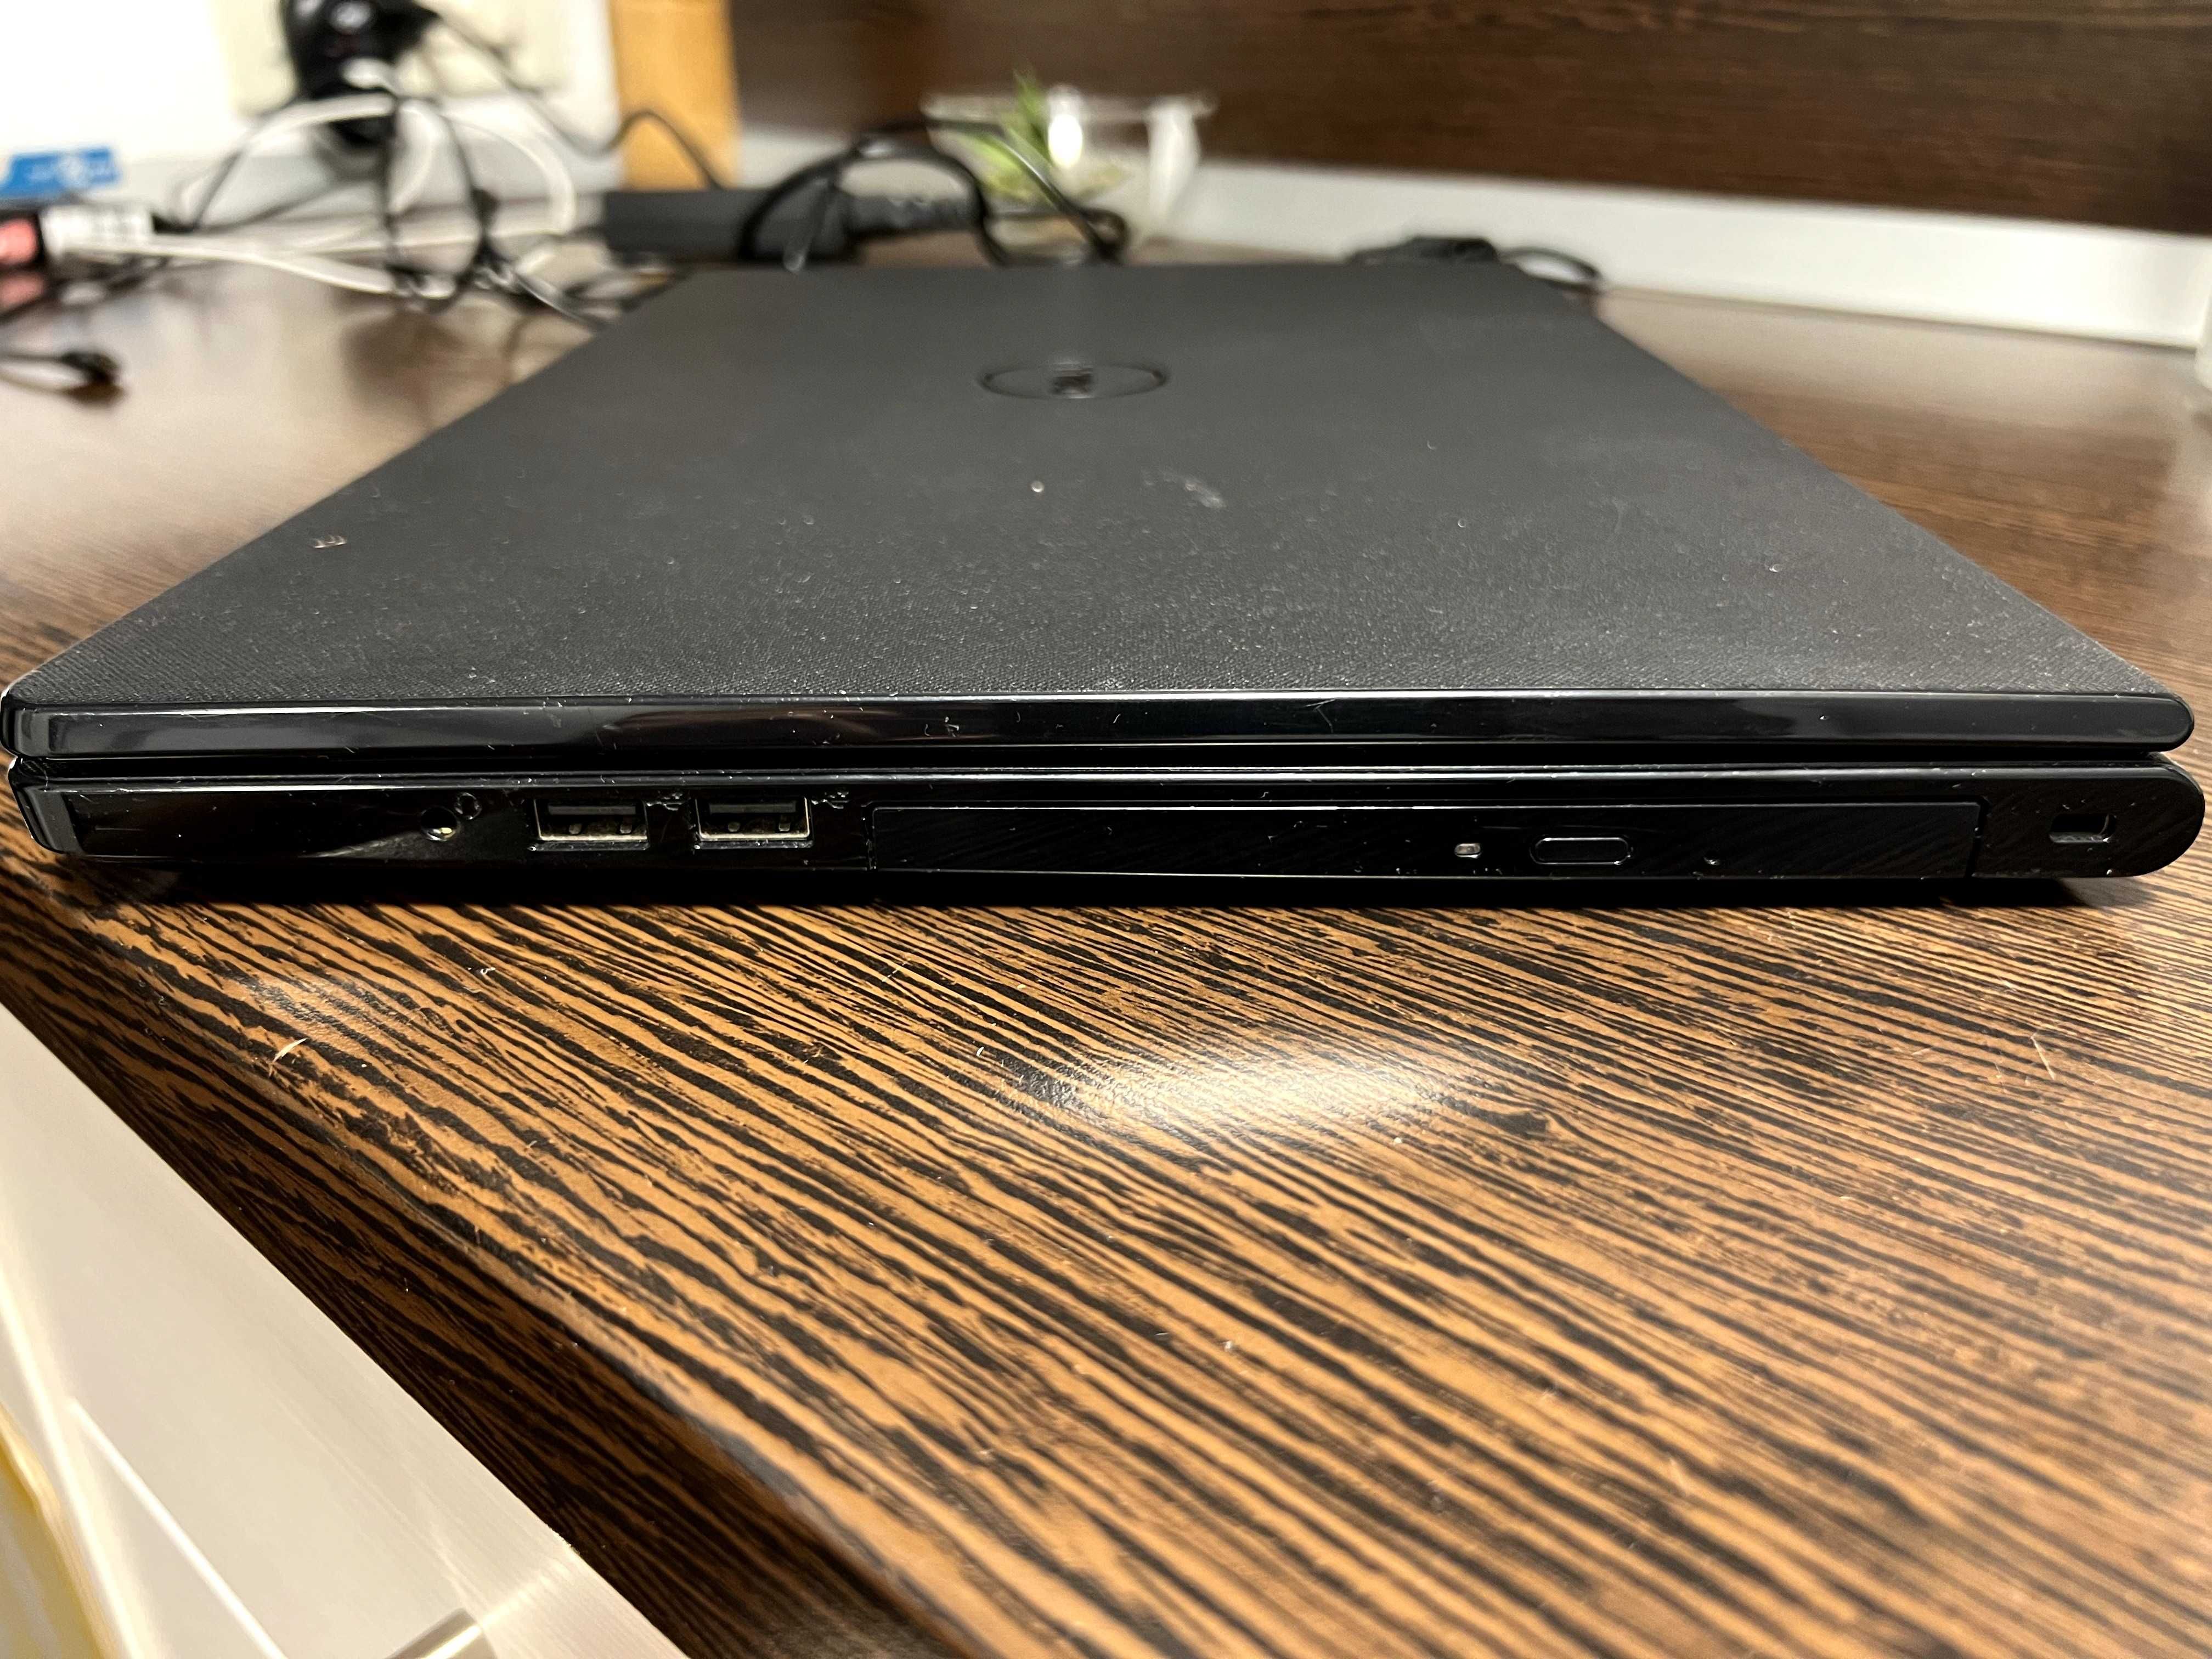 Vand laptop Dell 15" i5 SSD